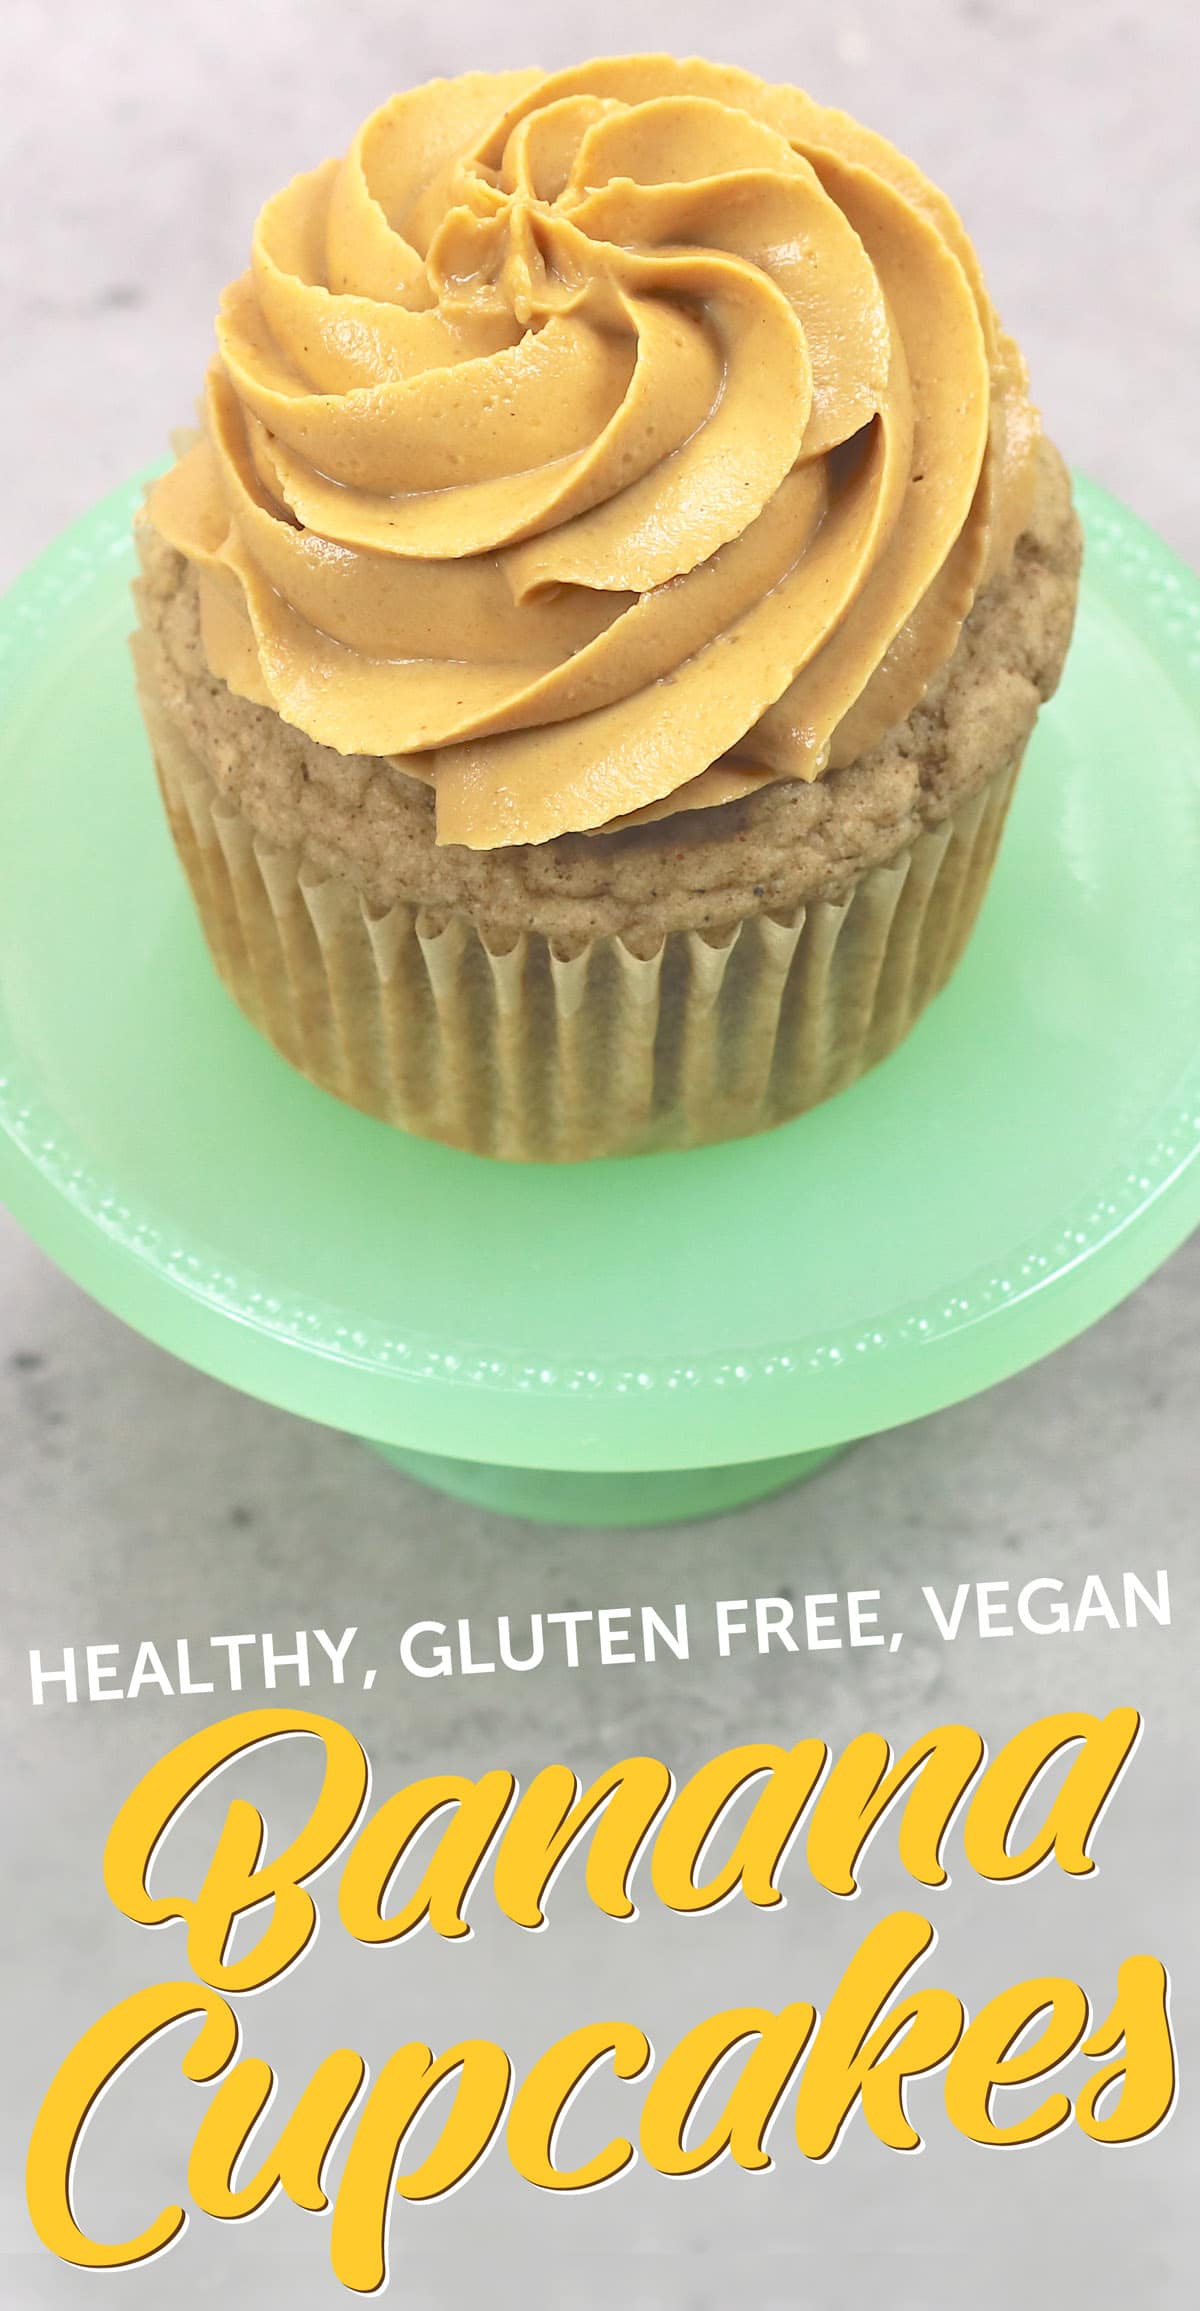 Gluten Free Vegan Banana Cupcakes with Peanut Butter Frosting